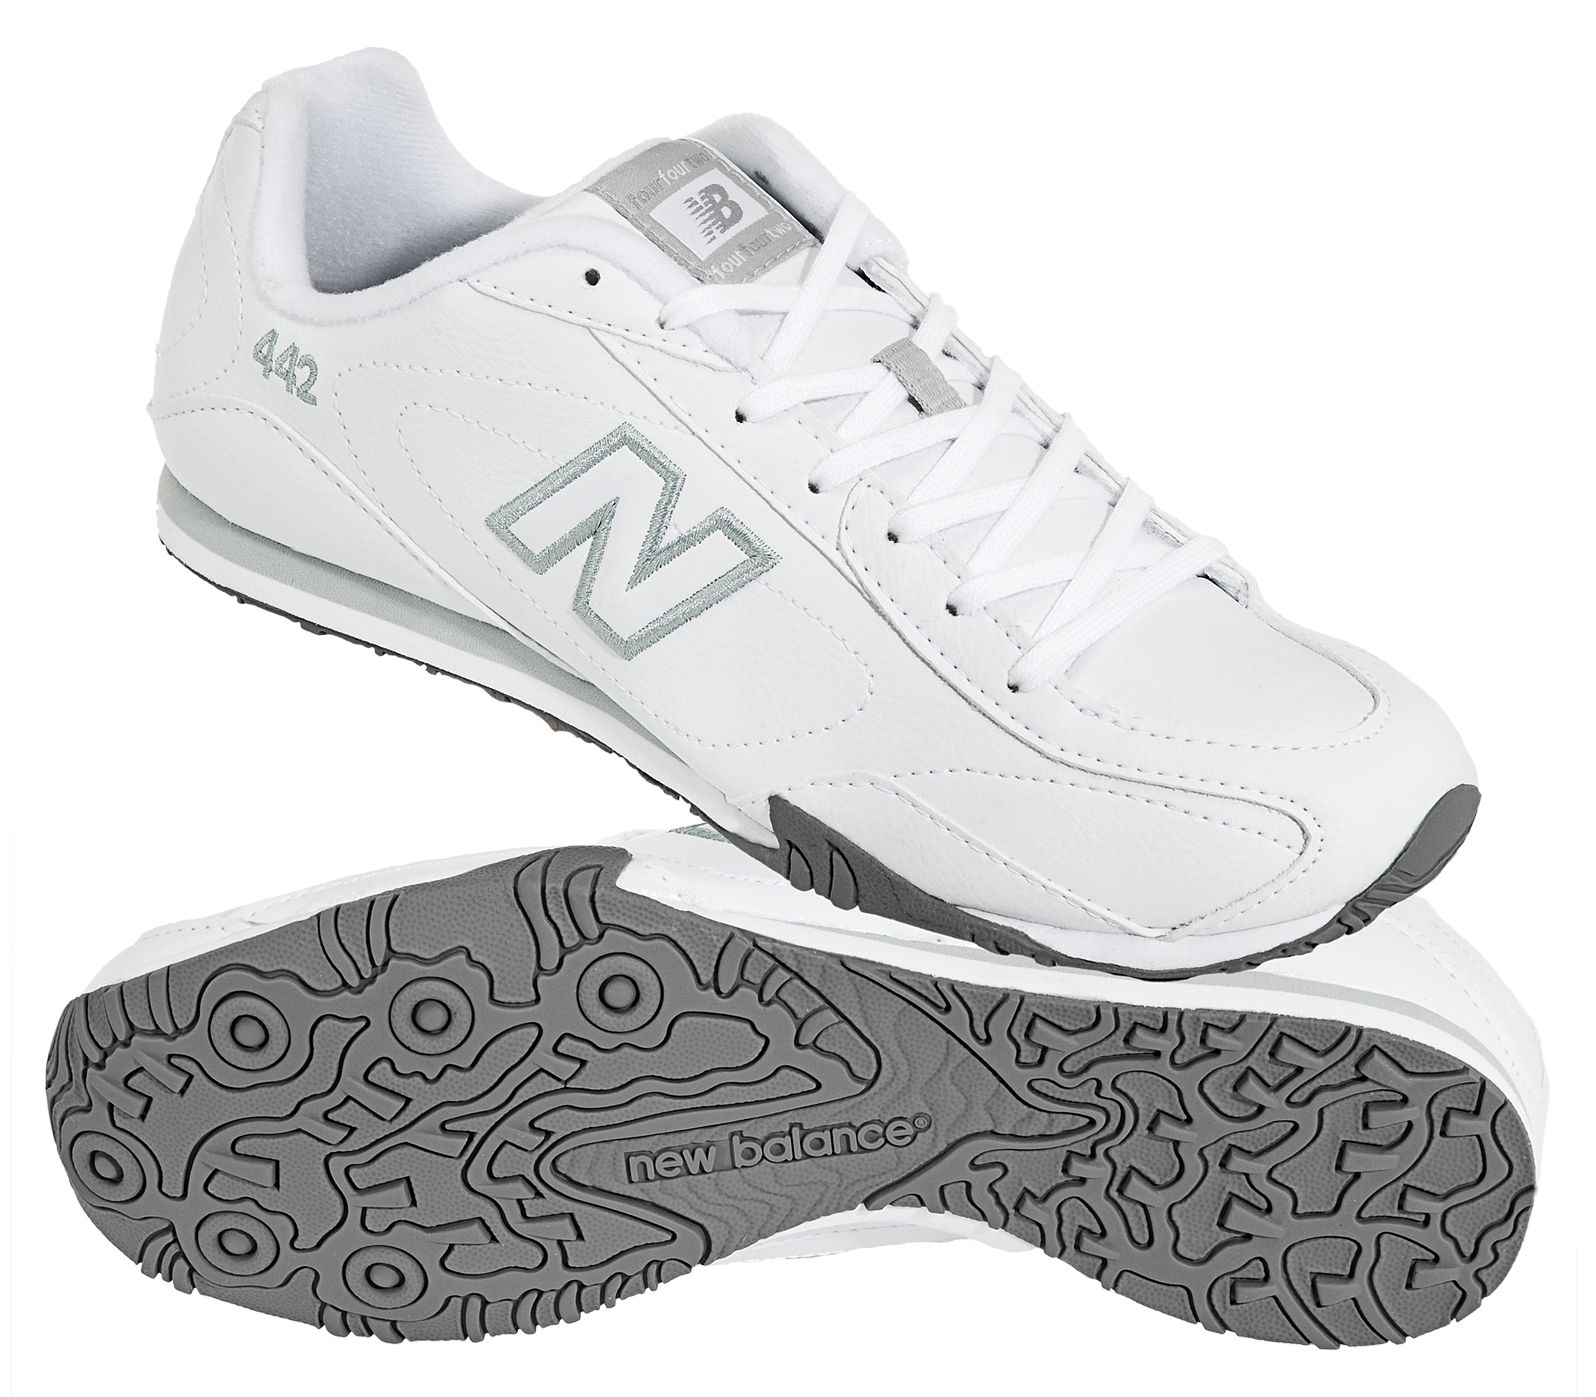 new balance sneakers 442